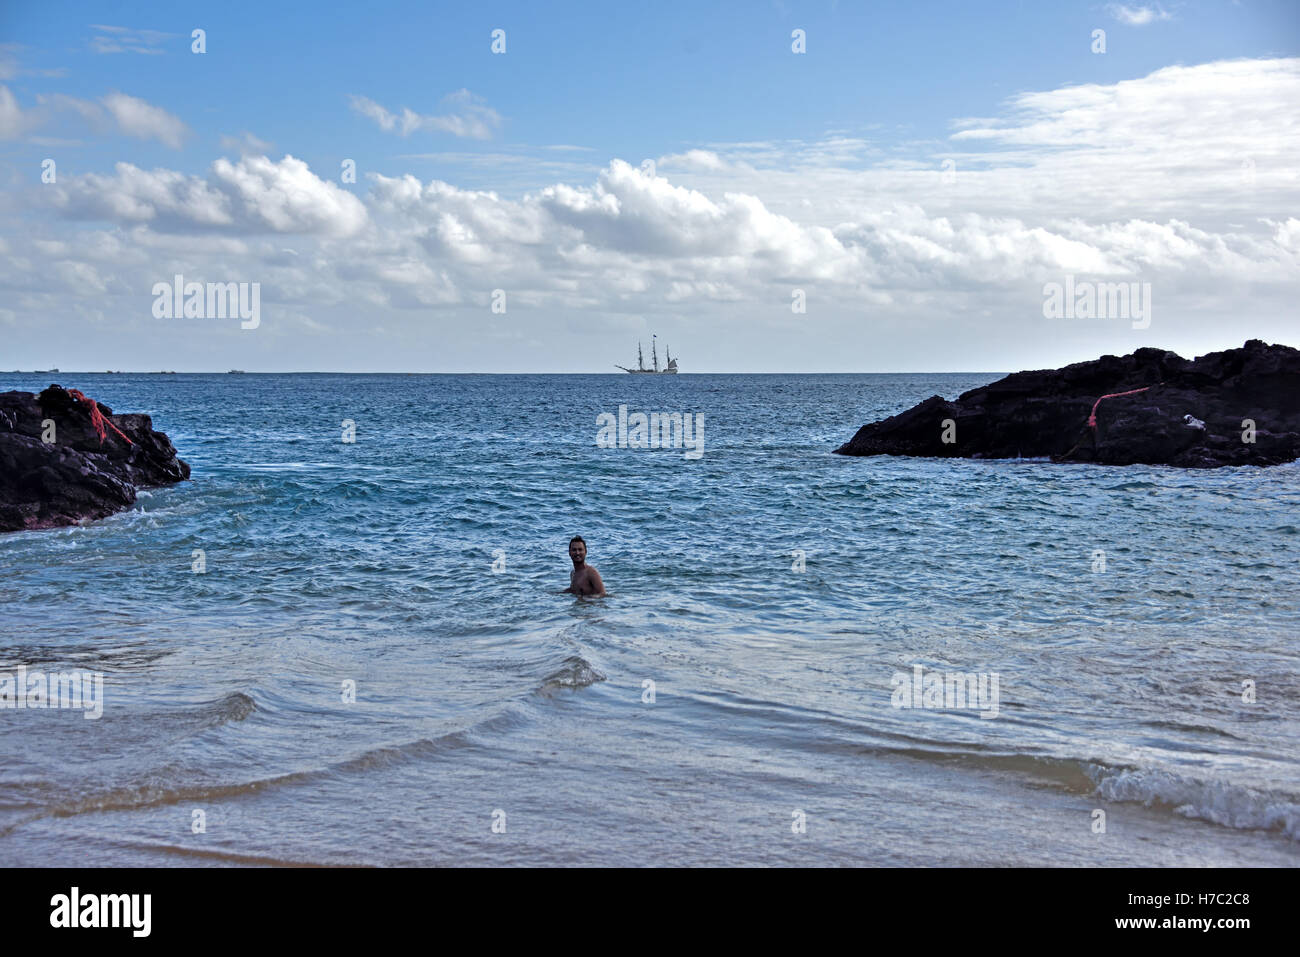 Swimming in Comfortless Cove on the North West coast of Ascension Island. The Tall Ship on the horizon is The Bark Europa. Stock Photo